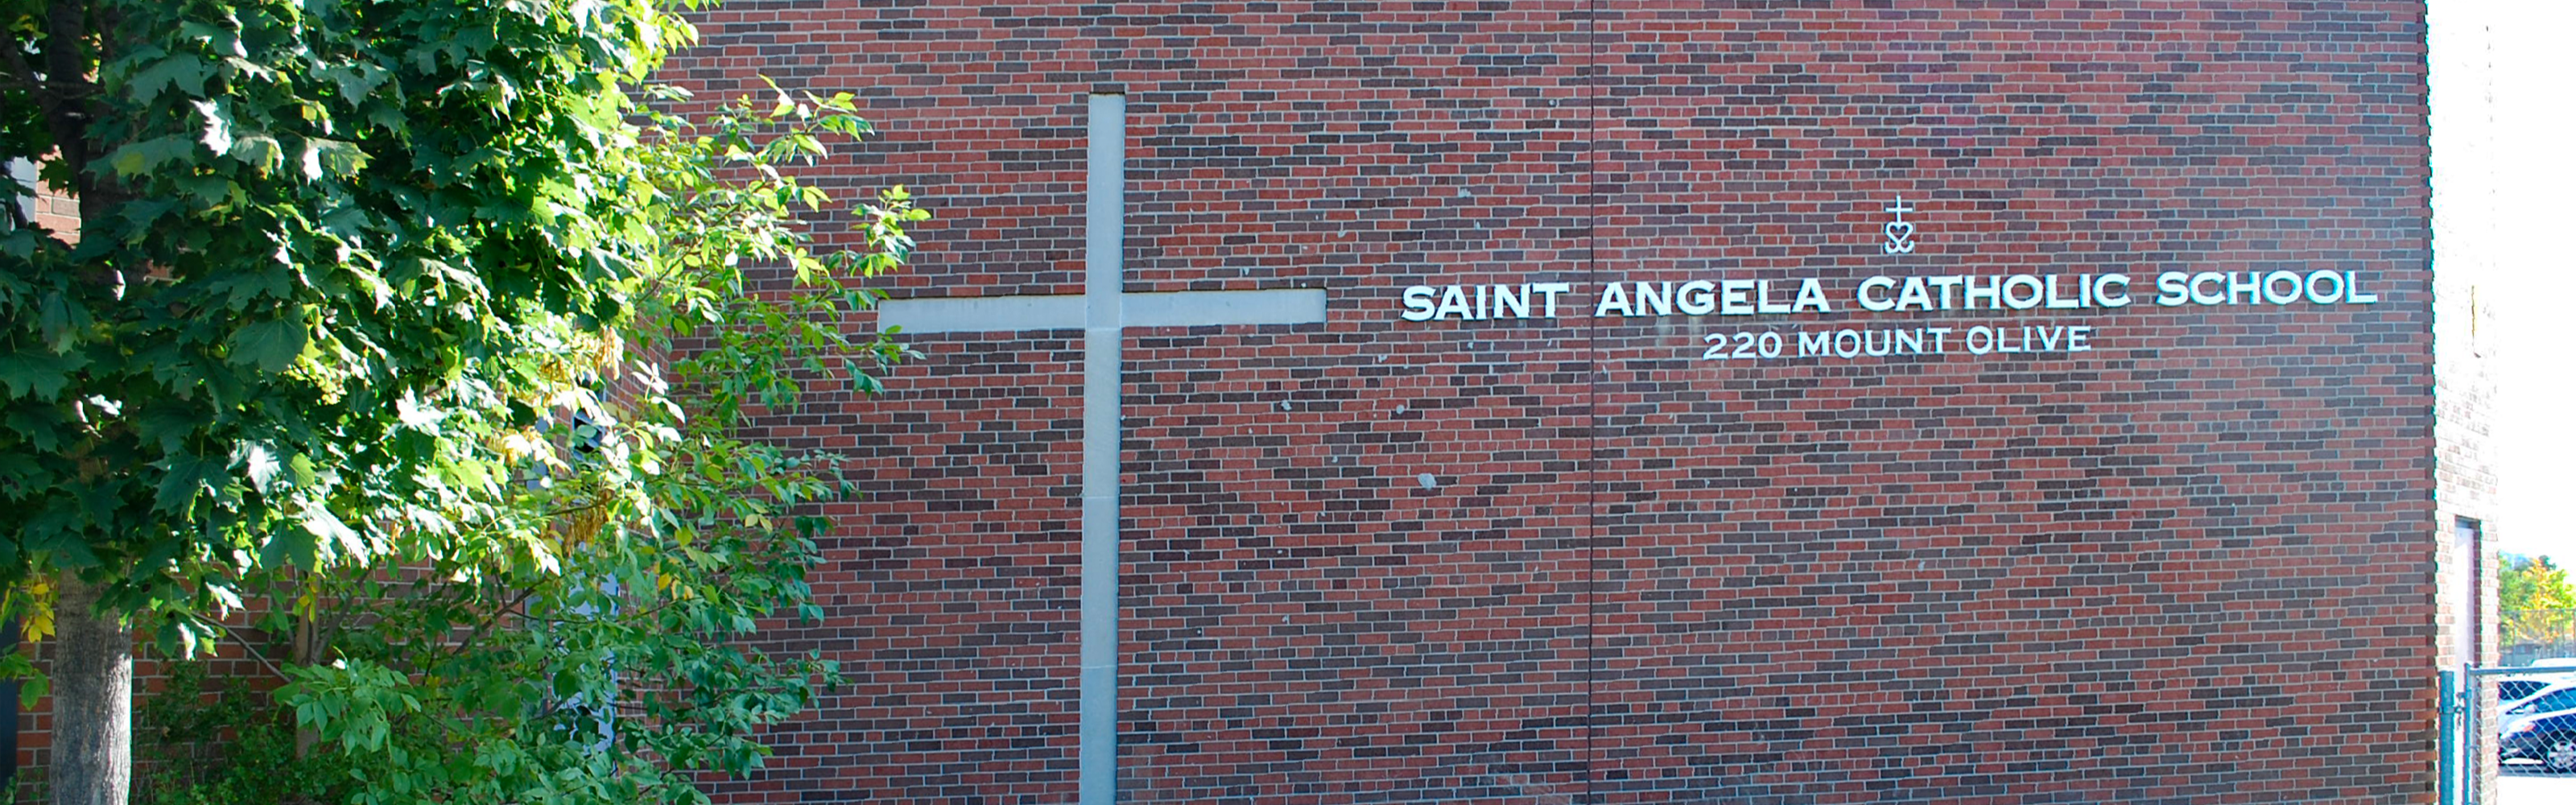 The front of the St. Angela Catholic School building.